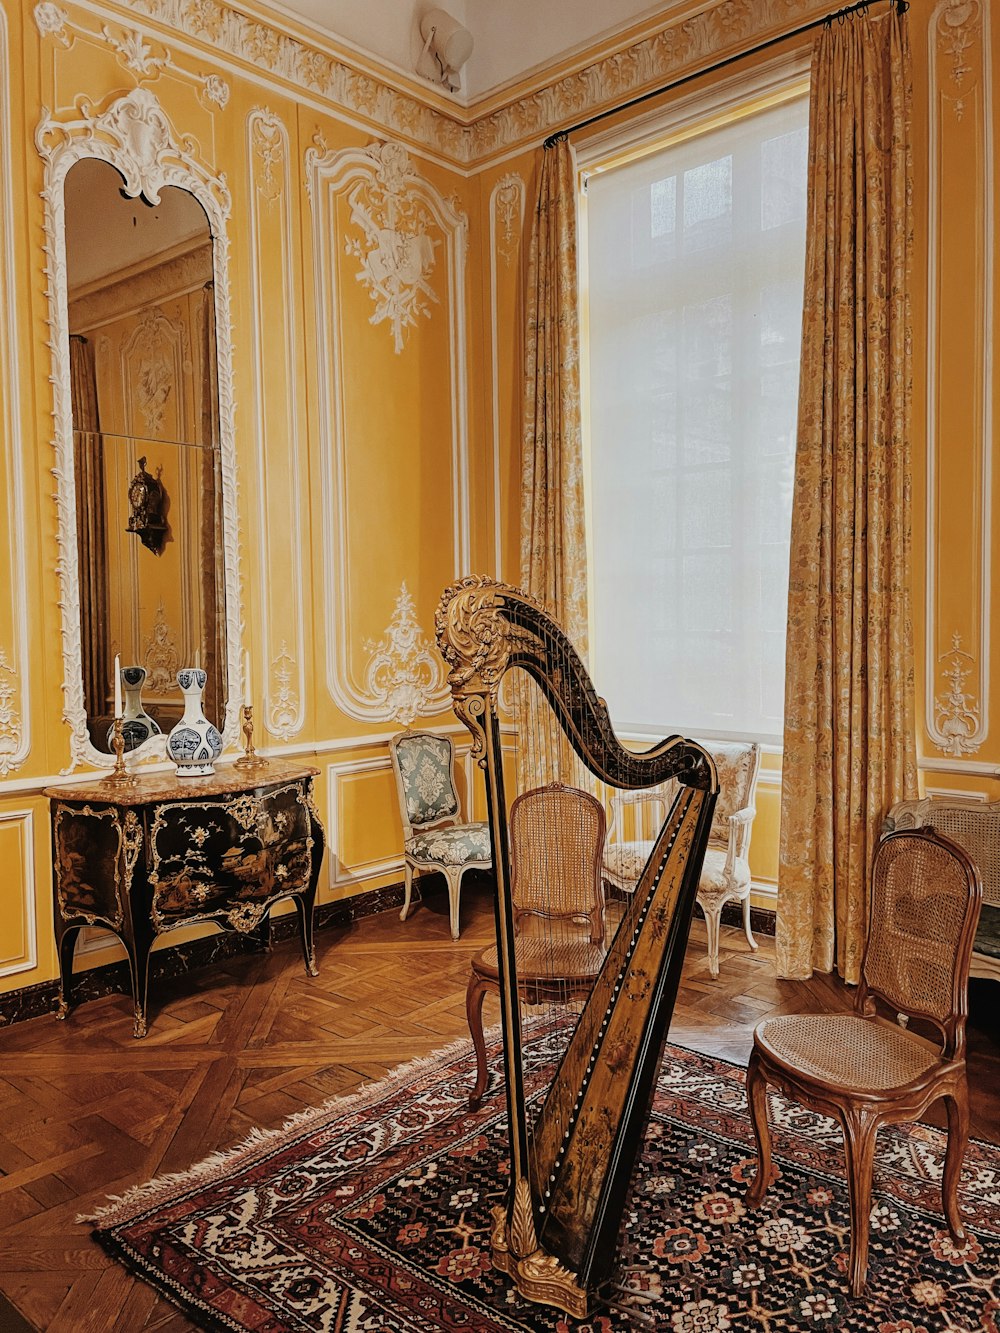 a harp sitting on top of a rug in a room